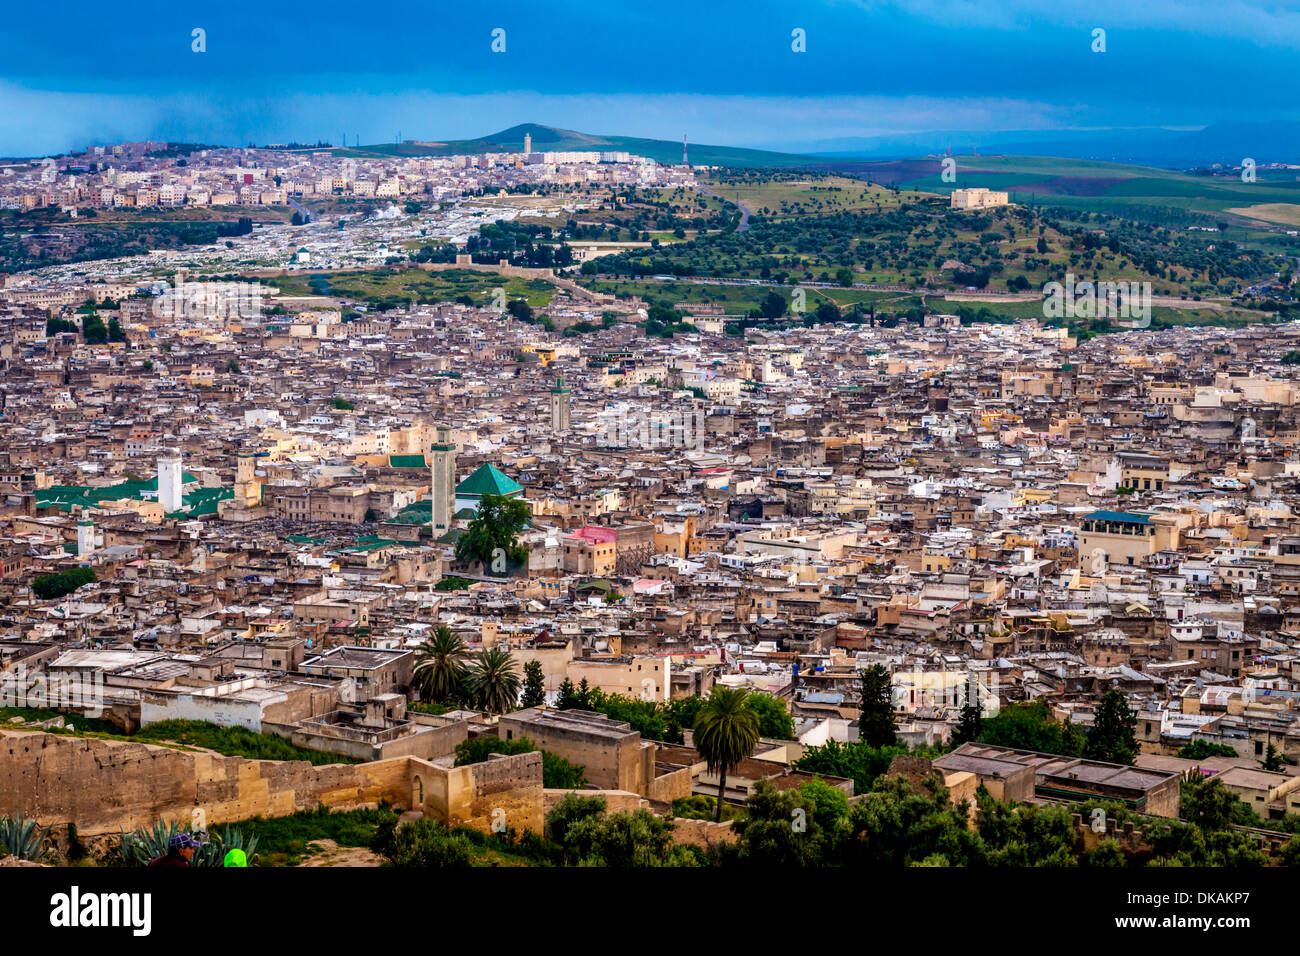 A View of The Medina (Old City) Fez, Morocco Stock Photo